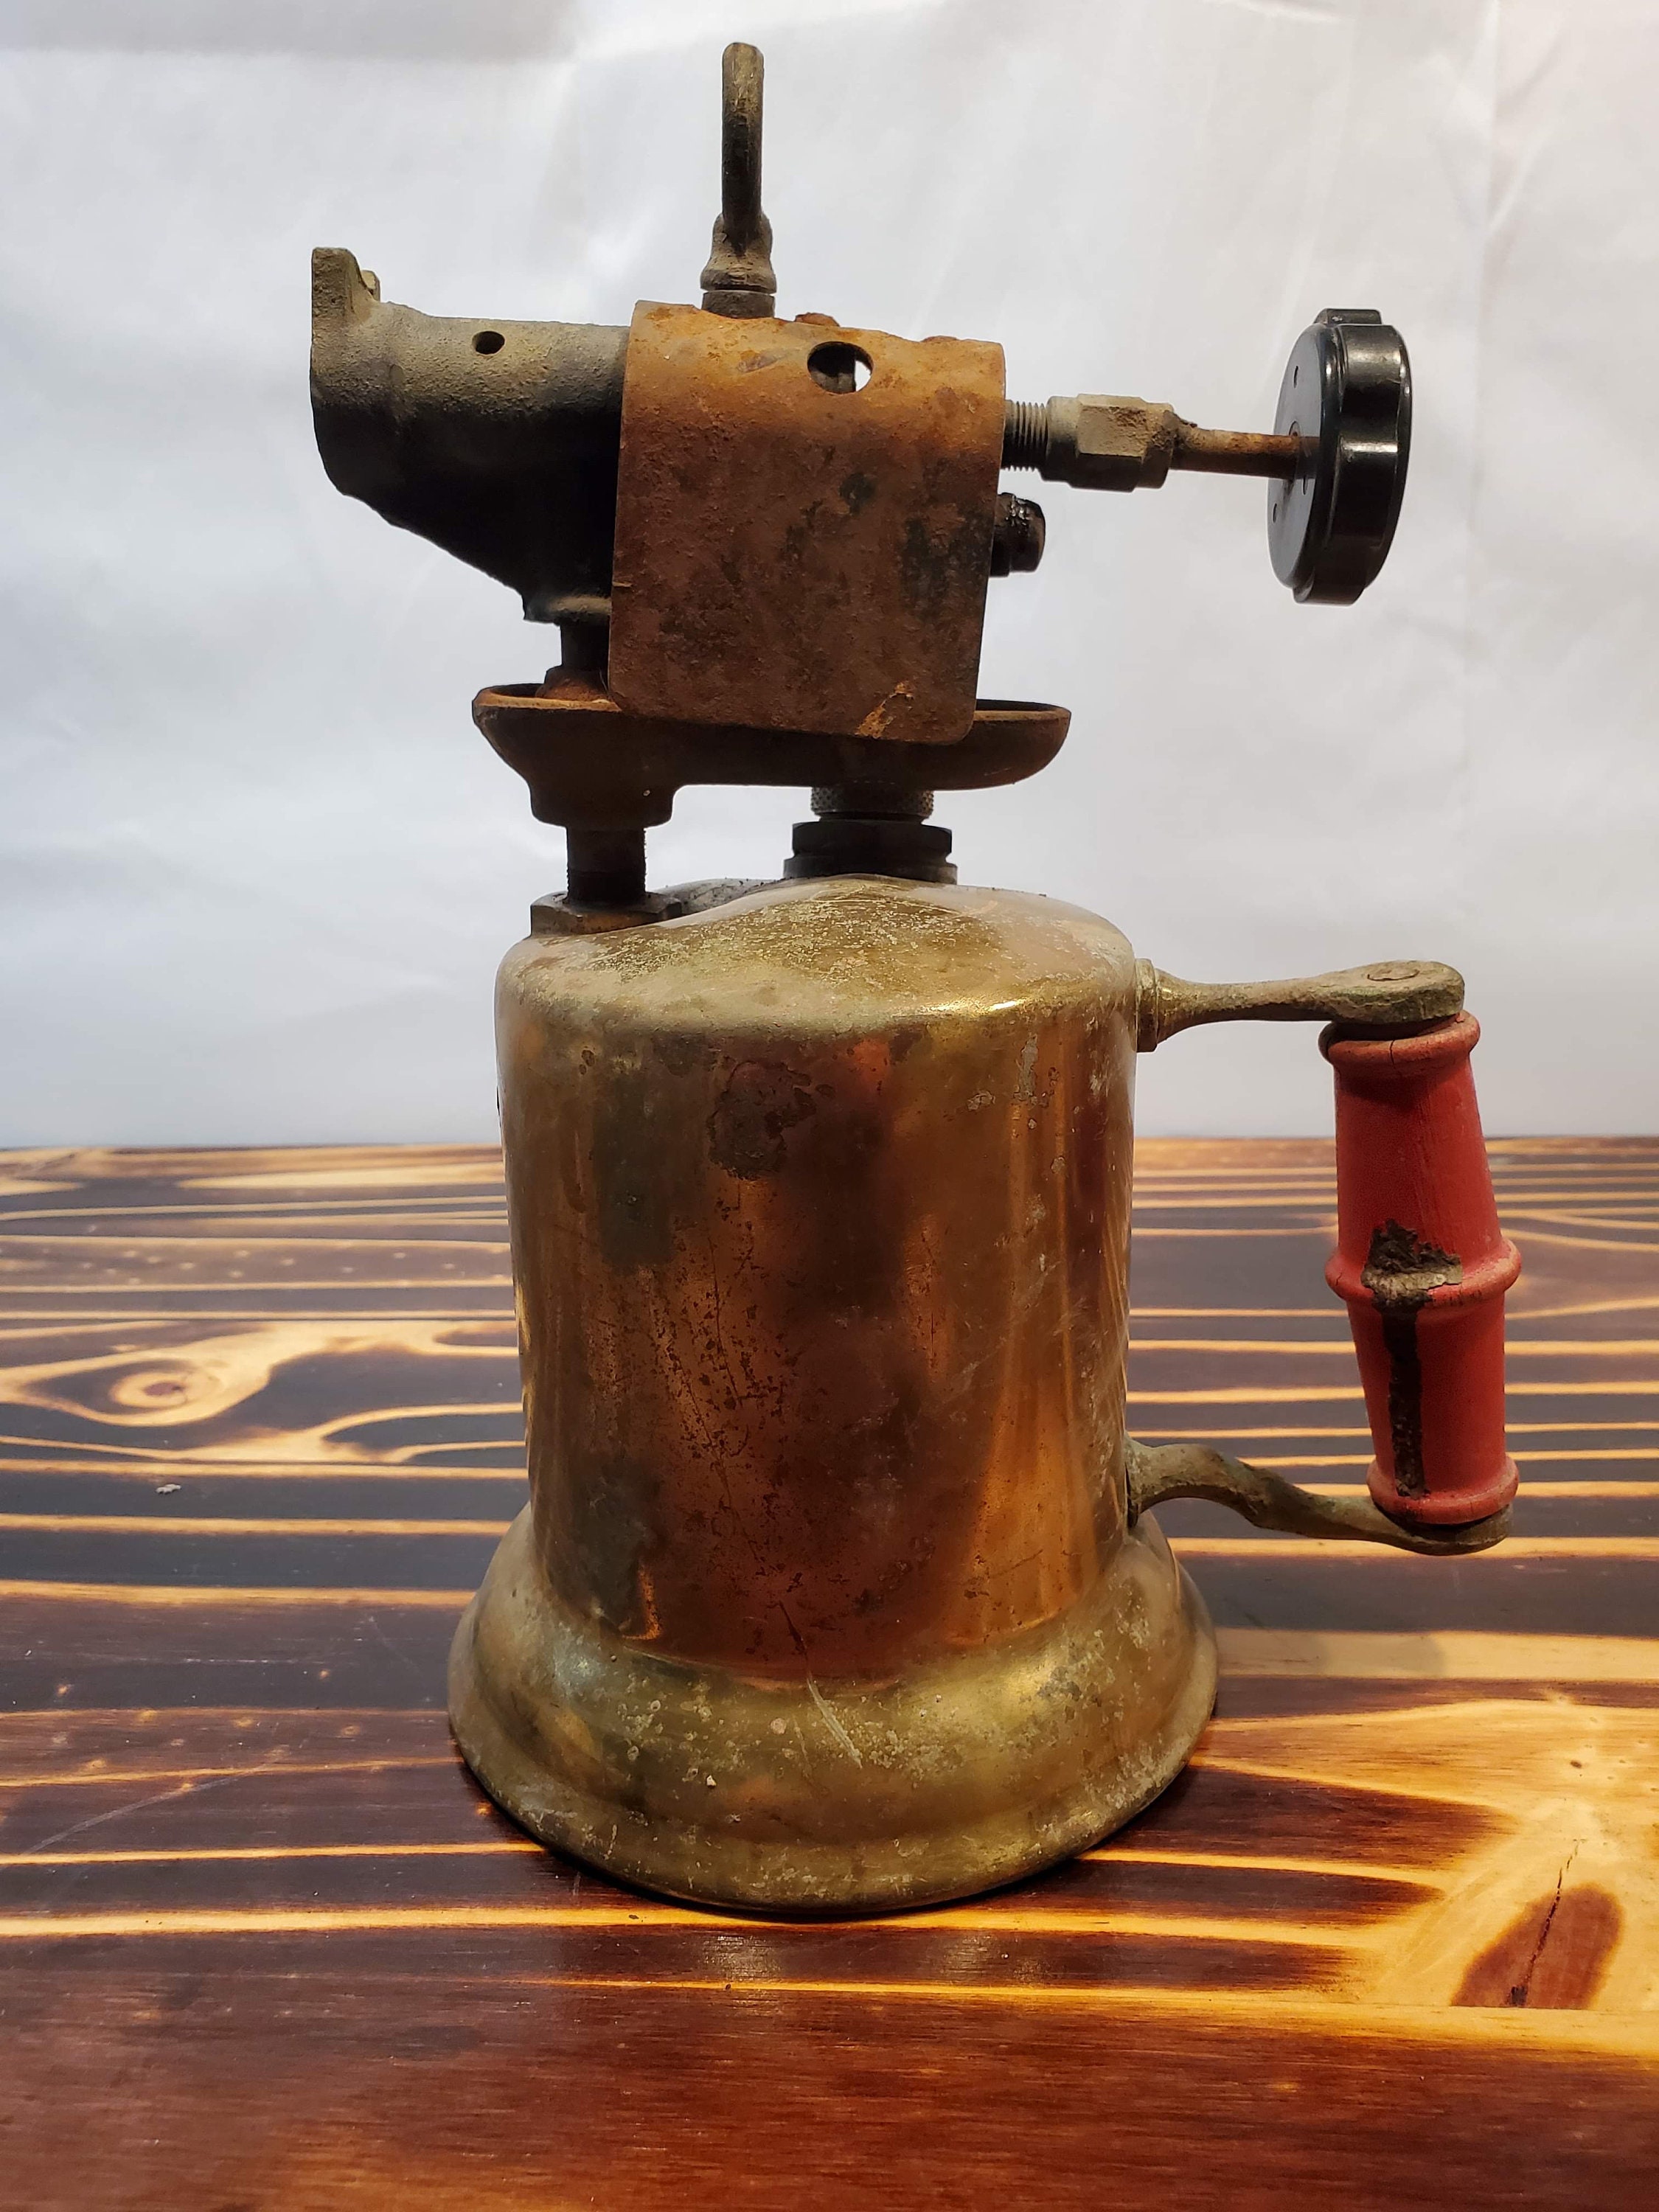 Vintage or Antique Hand Held Brass Torch Lamp Miner’s Railroad Spelunking  or ?